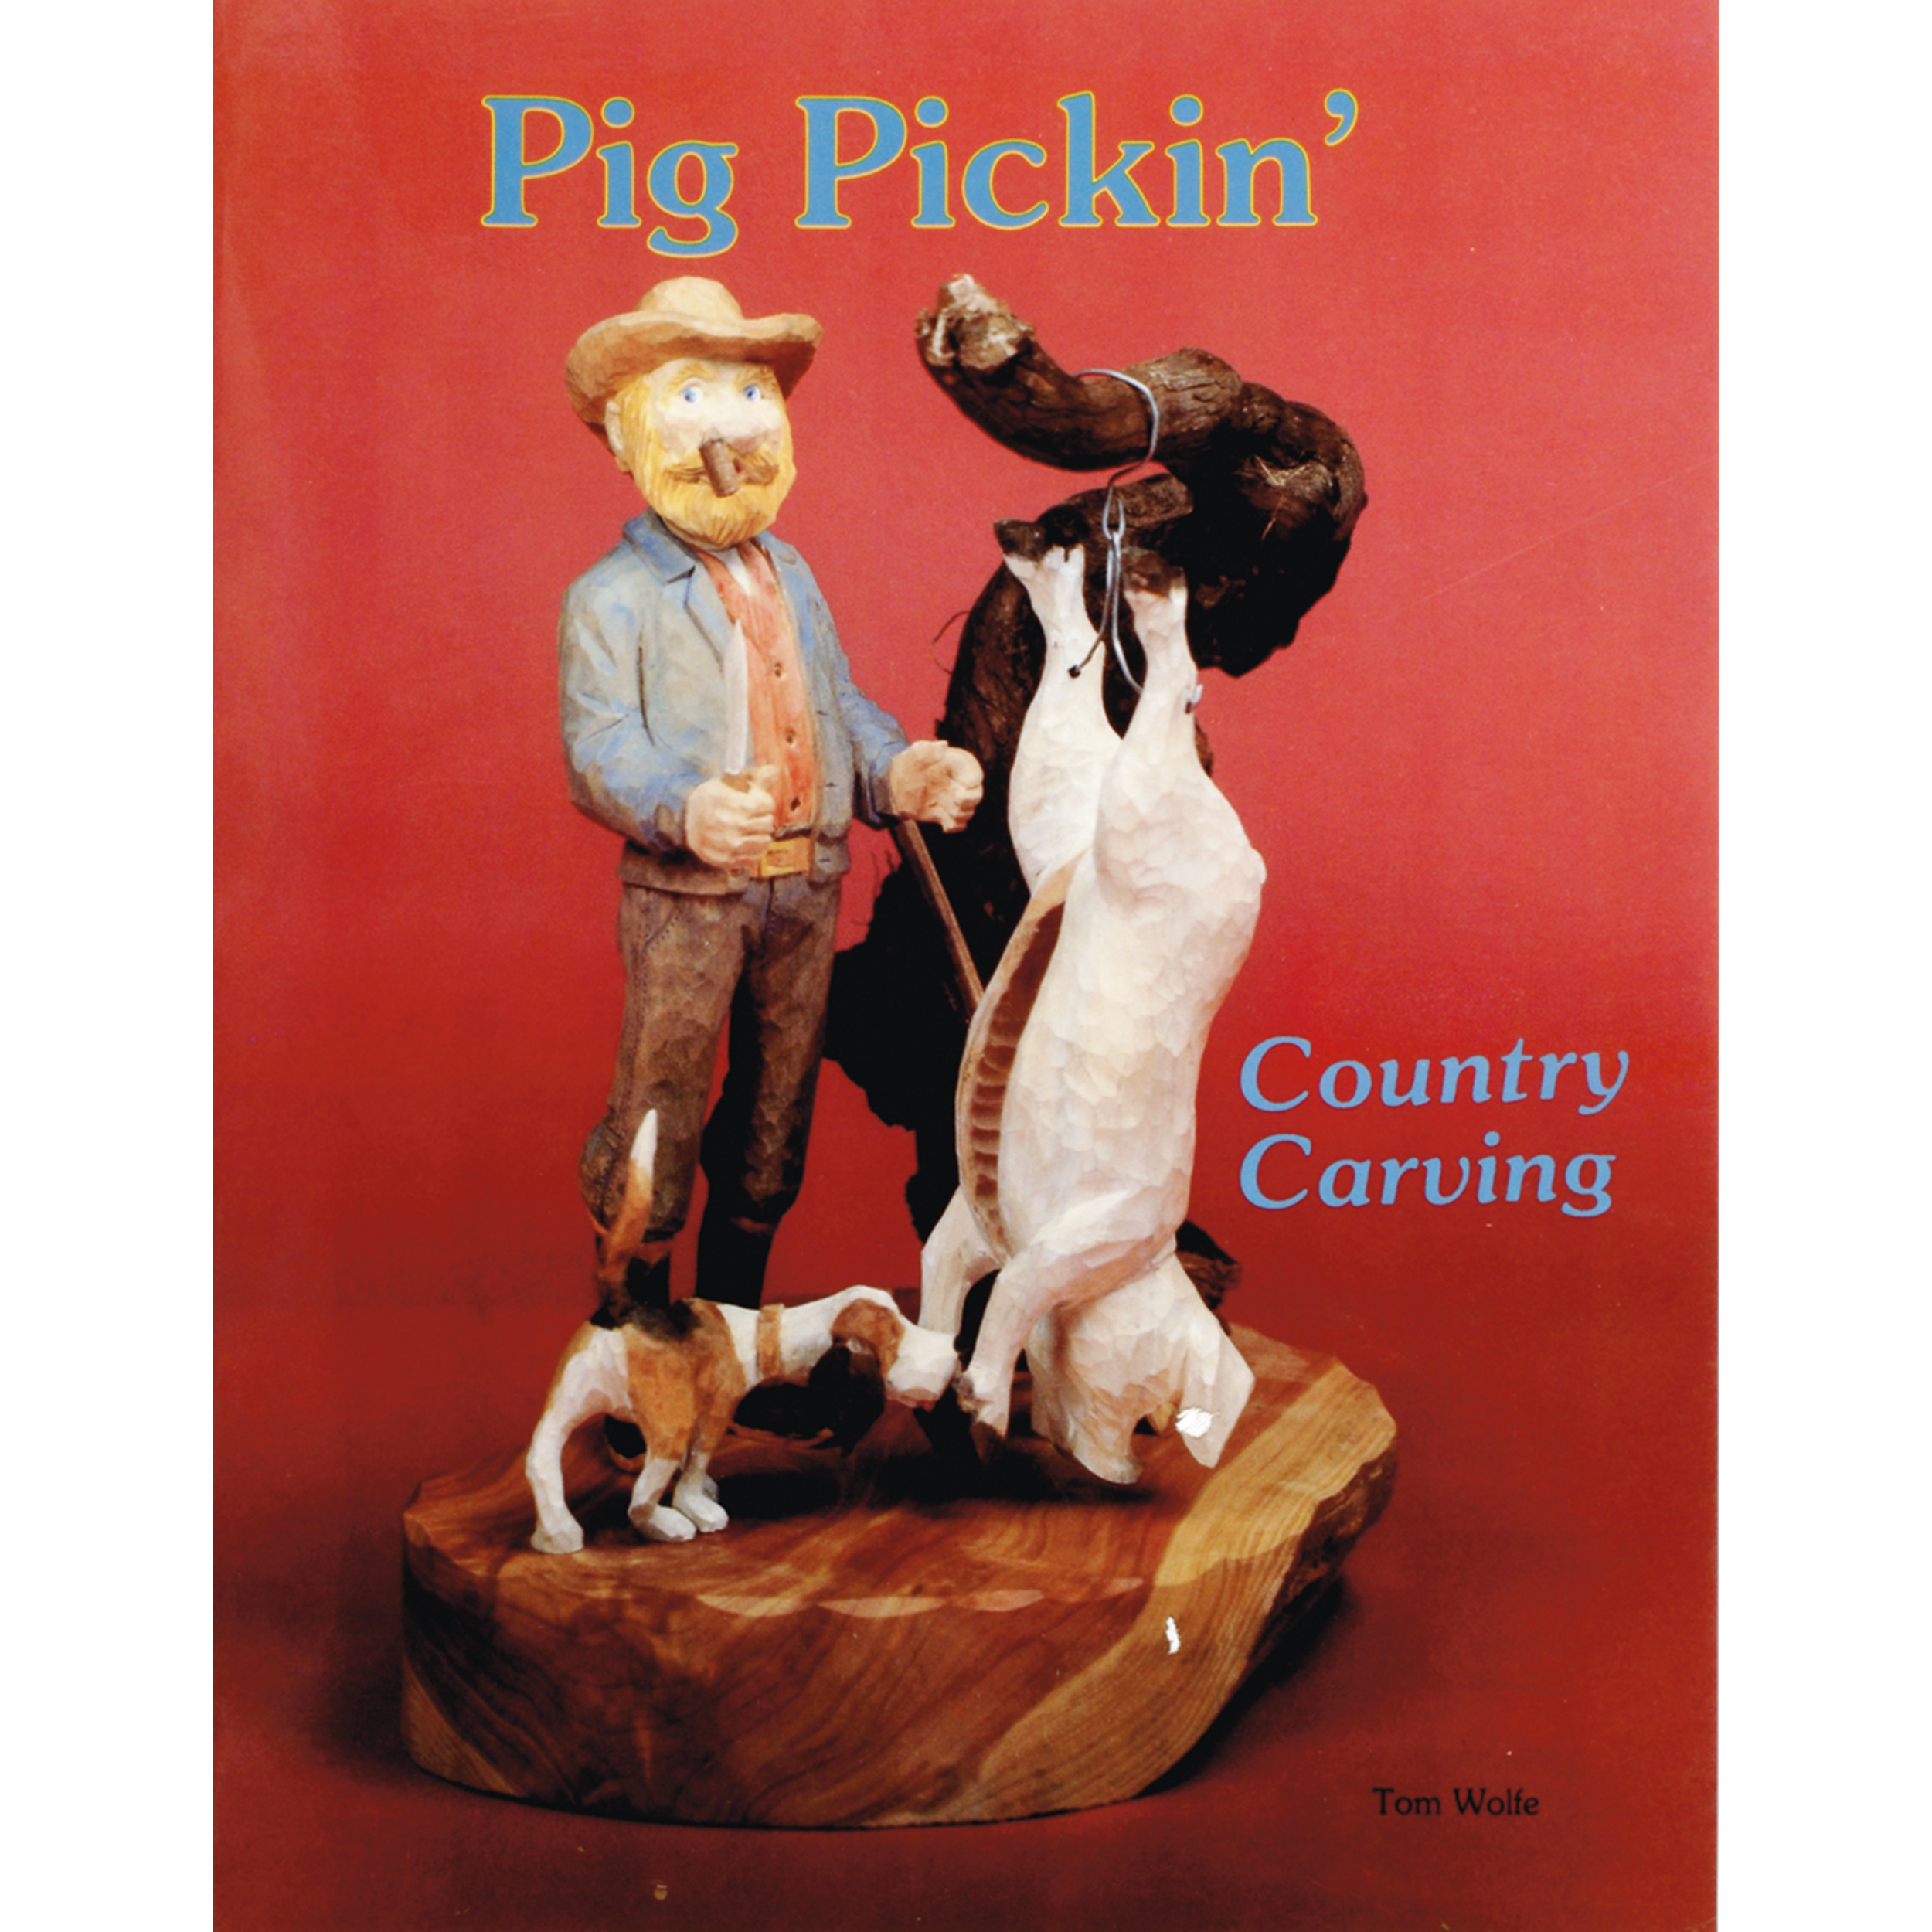 Country Carving (pig Pickin